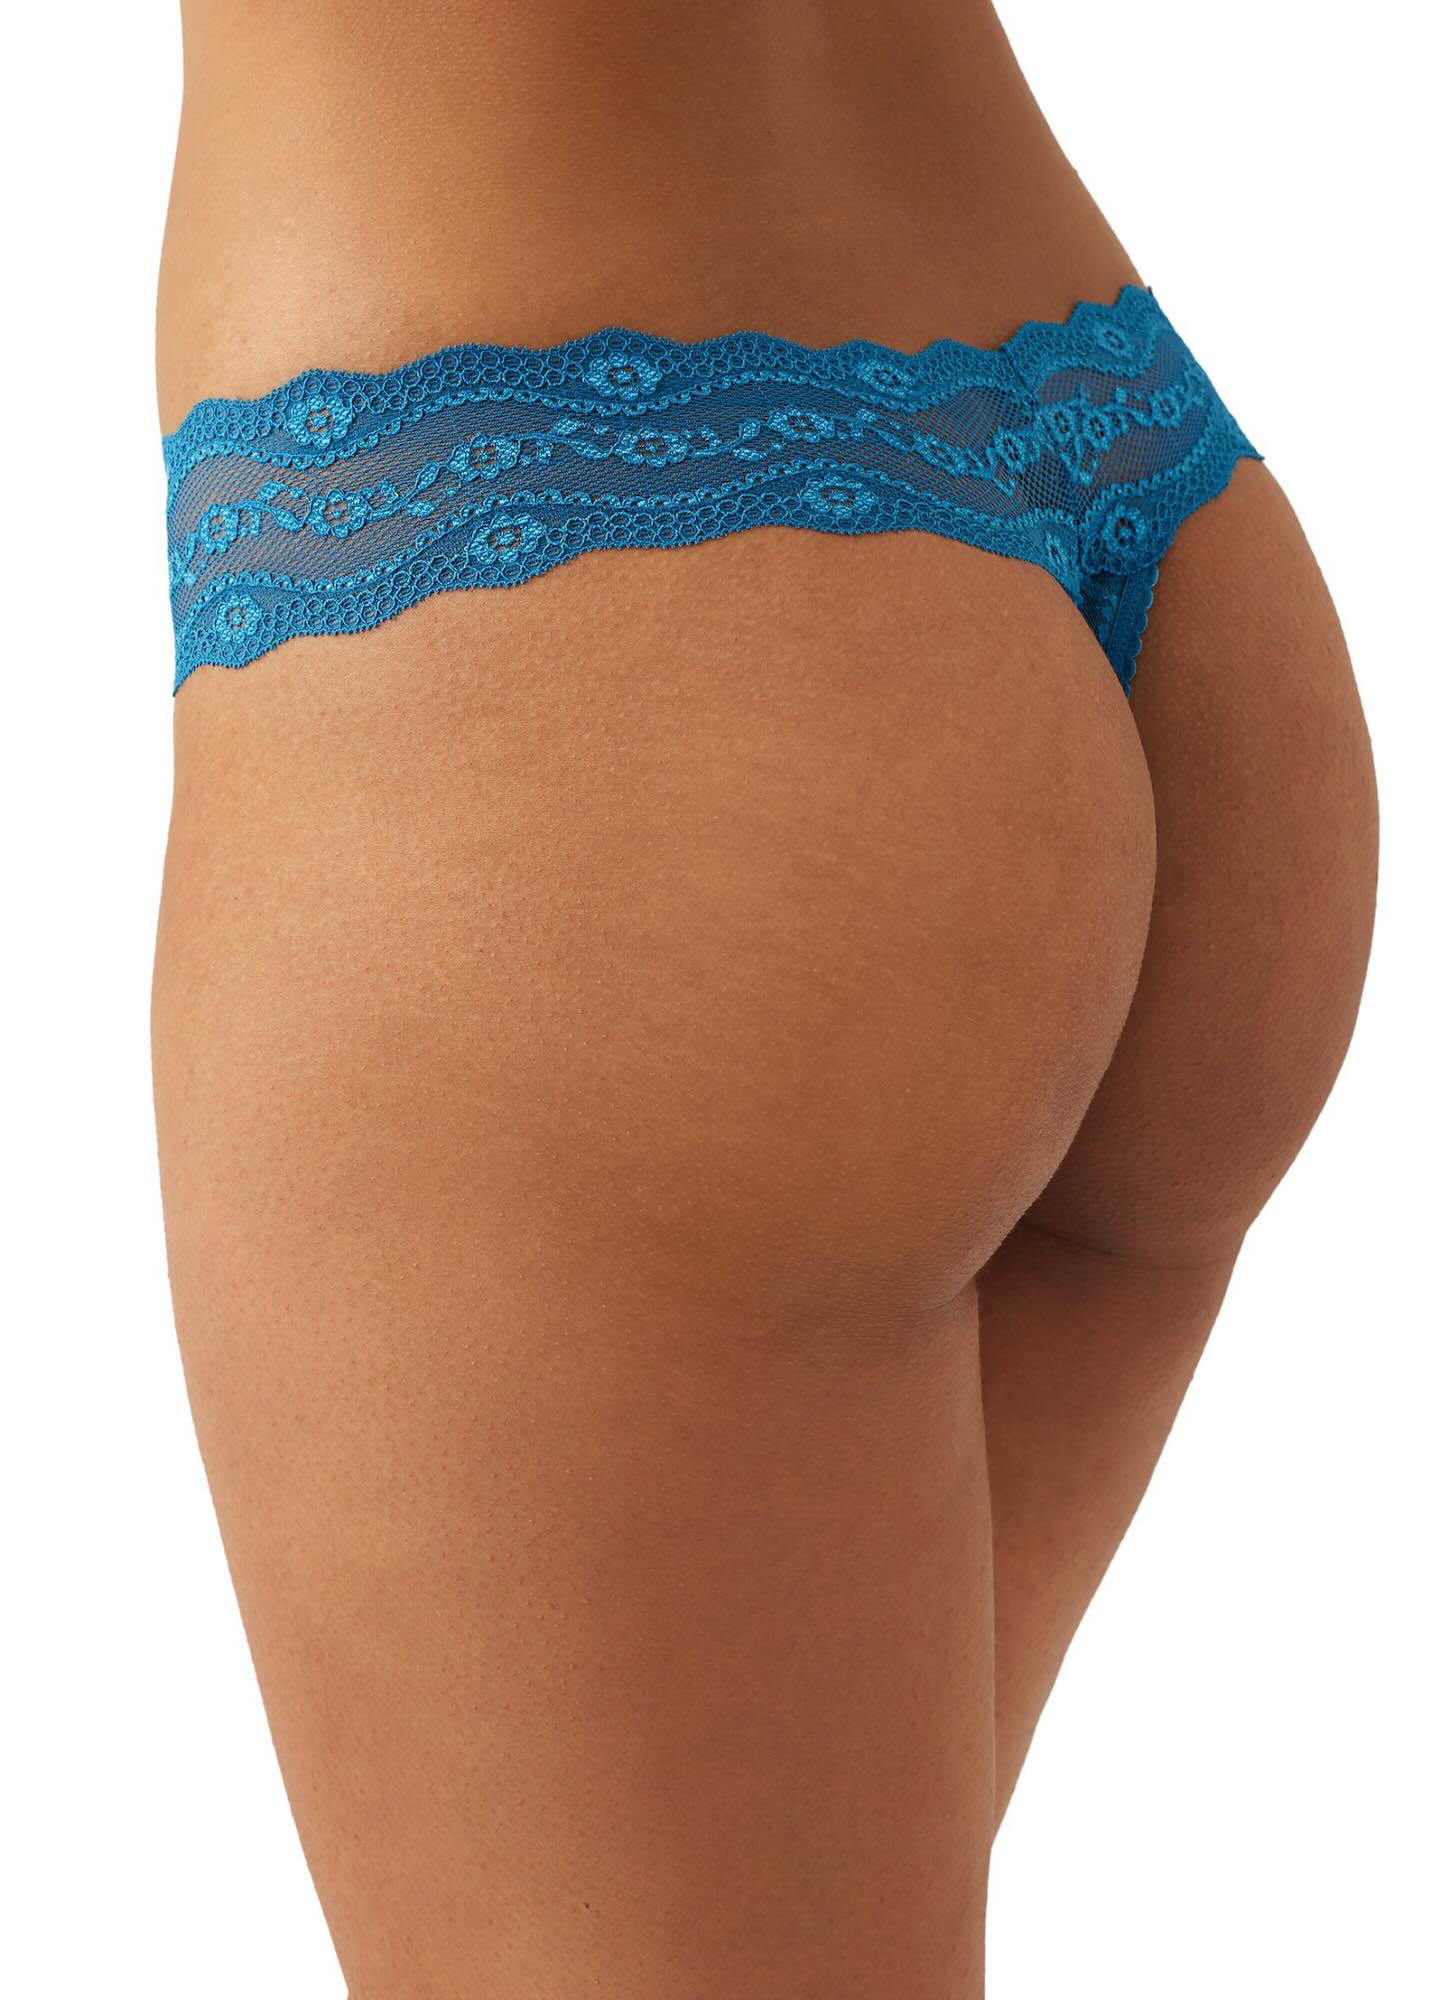 Lace Kiss thong - new spring color